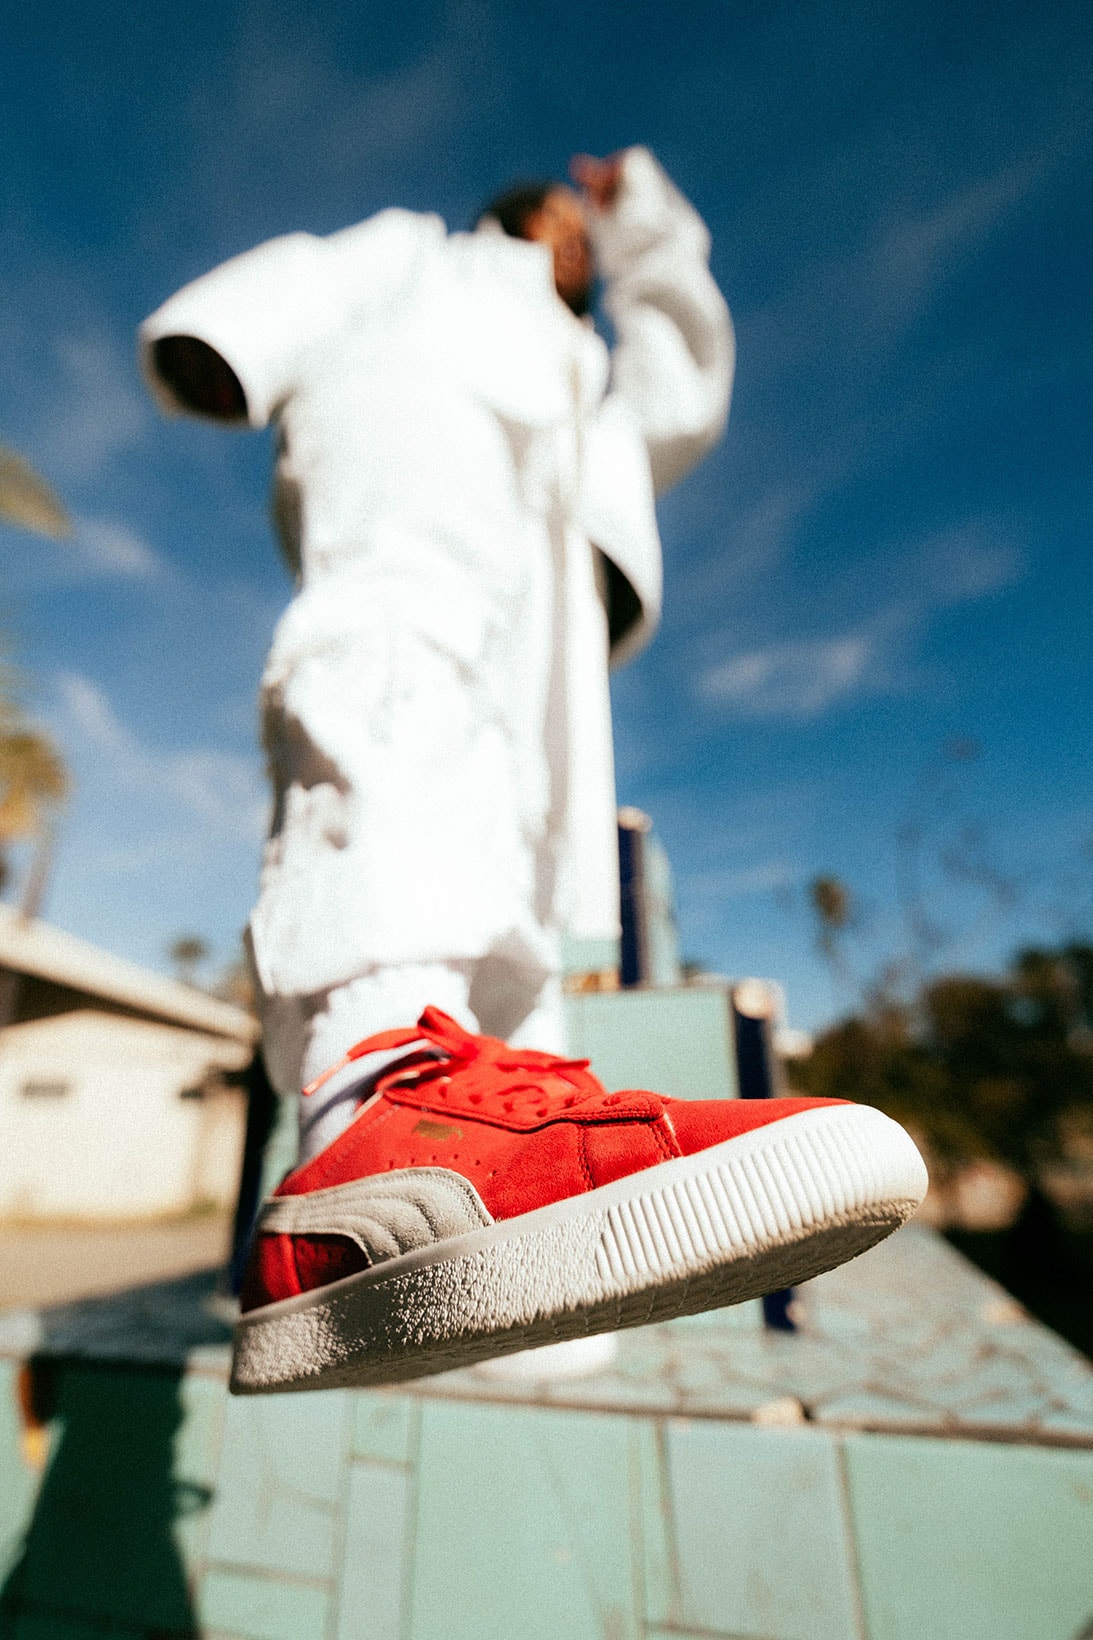 https://image-cdn.hypb.st/https%3A%2F%2Fhypebeast.com%2Fwp-content%2Fblogs.dir%2F6%2Ffiles%2F2020%2F12%2Fshavone-puma-collaboration-suede-vintage-vtg-sneakers-red-blue-colorway-campaign-release-5.jpg?cbr=1&q=90